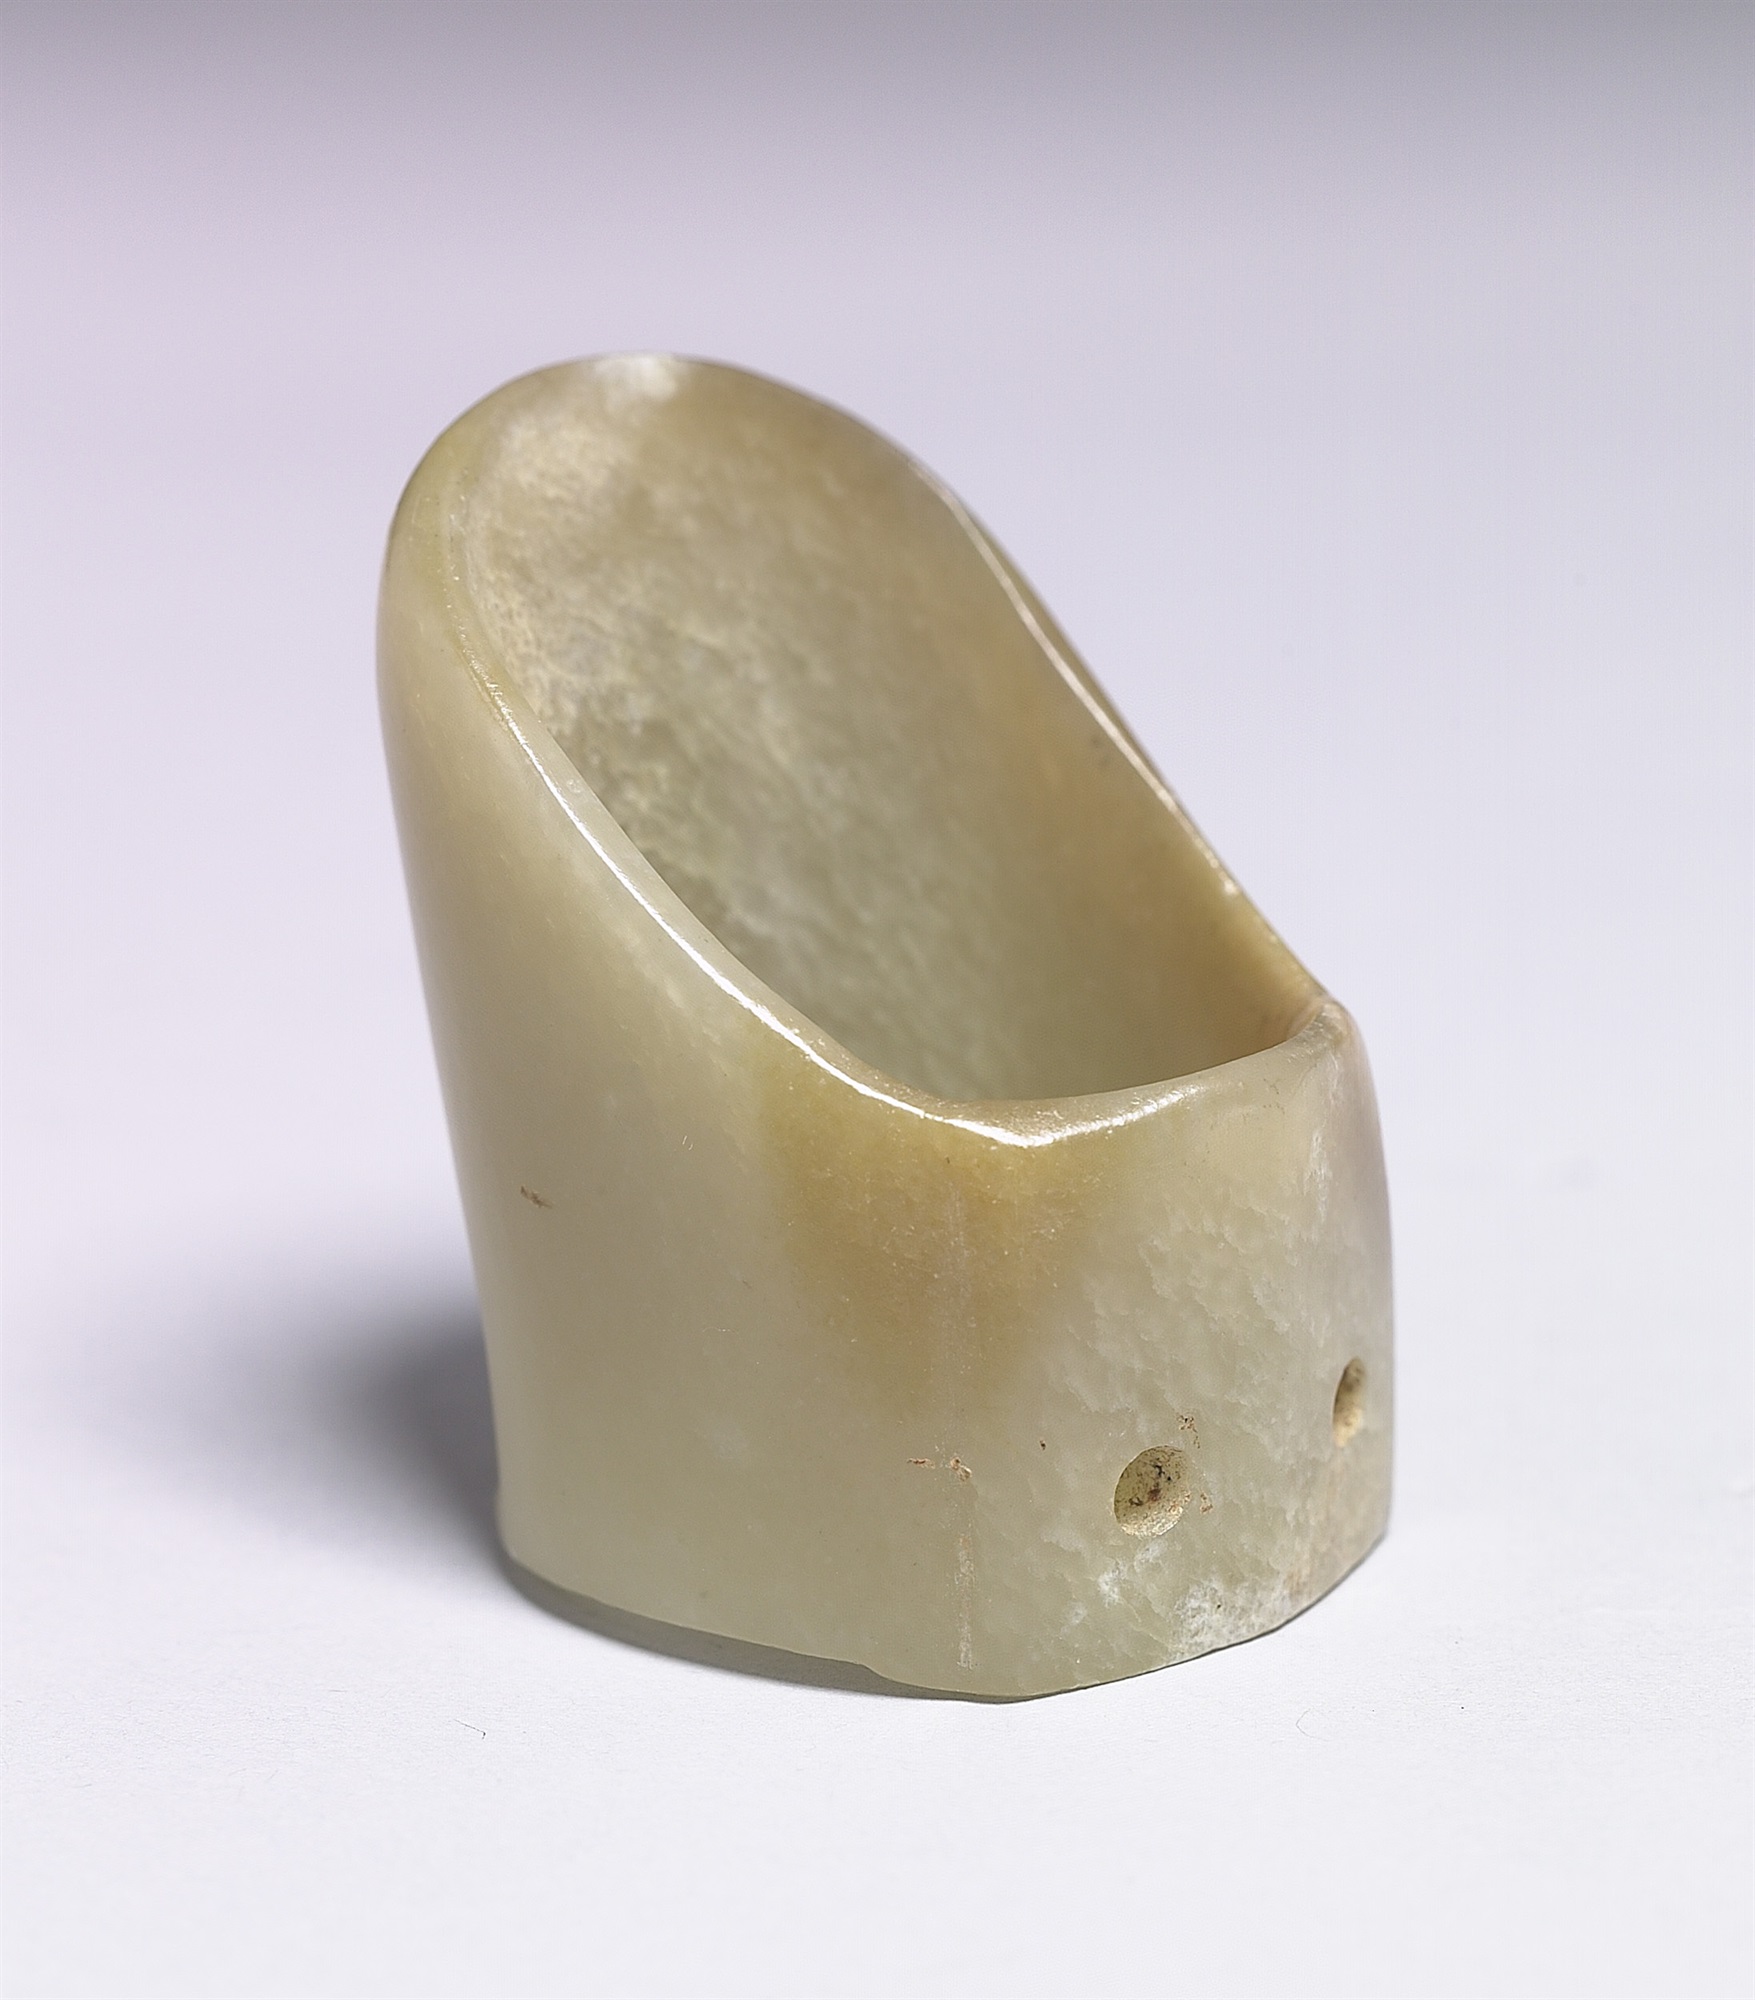 Jade archer’s ring (she) Late Shang dynasty to Western Zhou dynasty, ca. 1300-771 BCEpreview